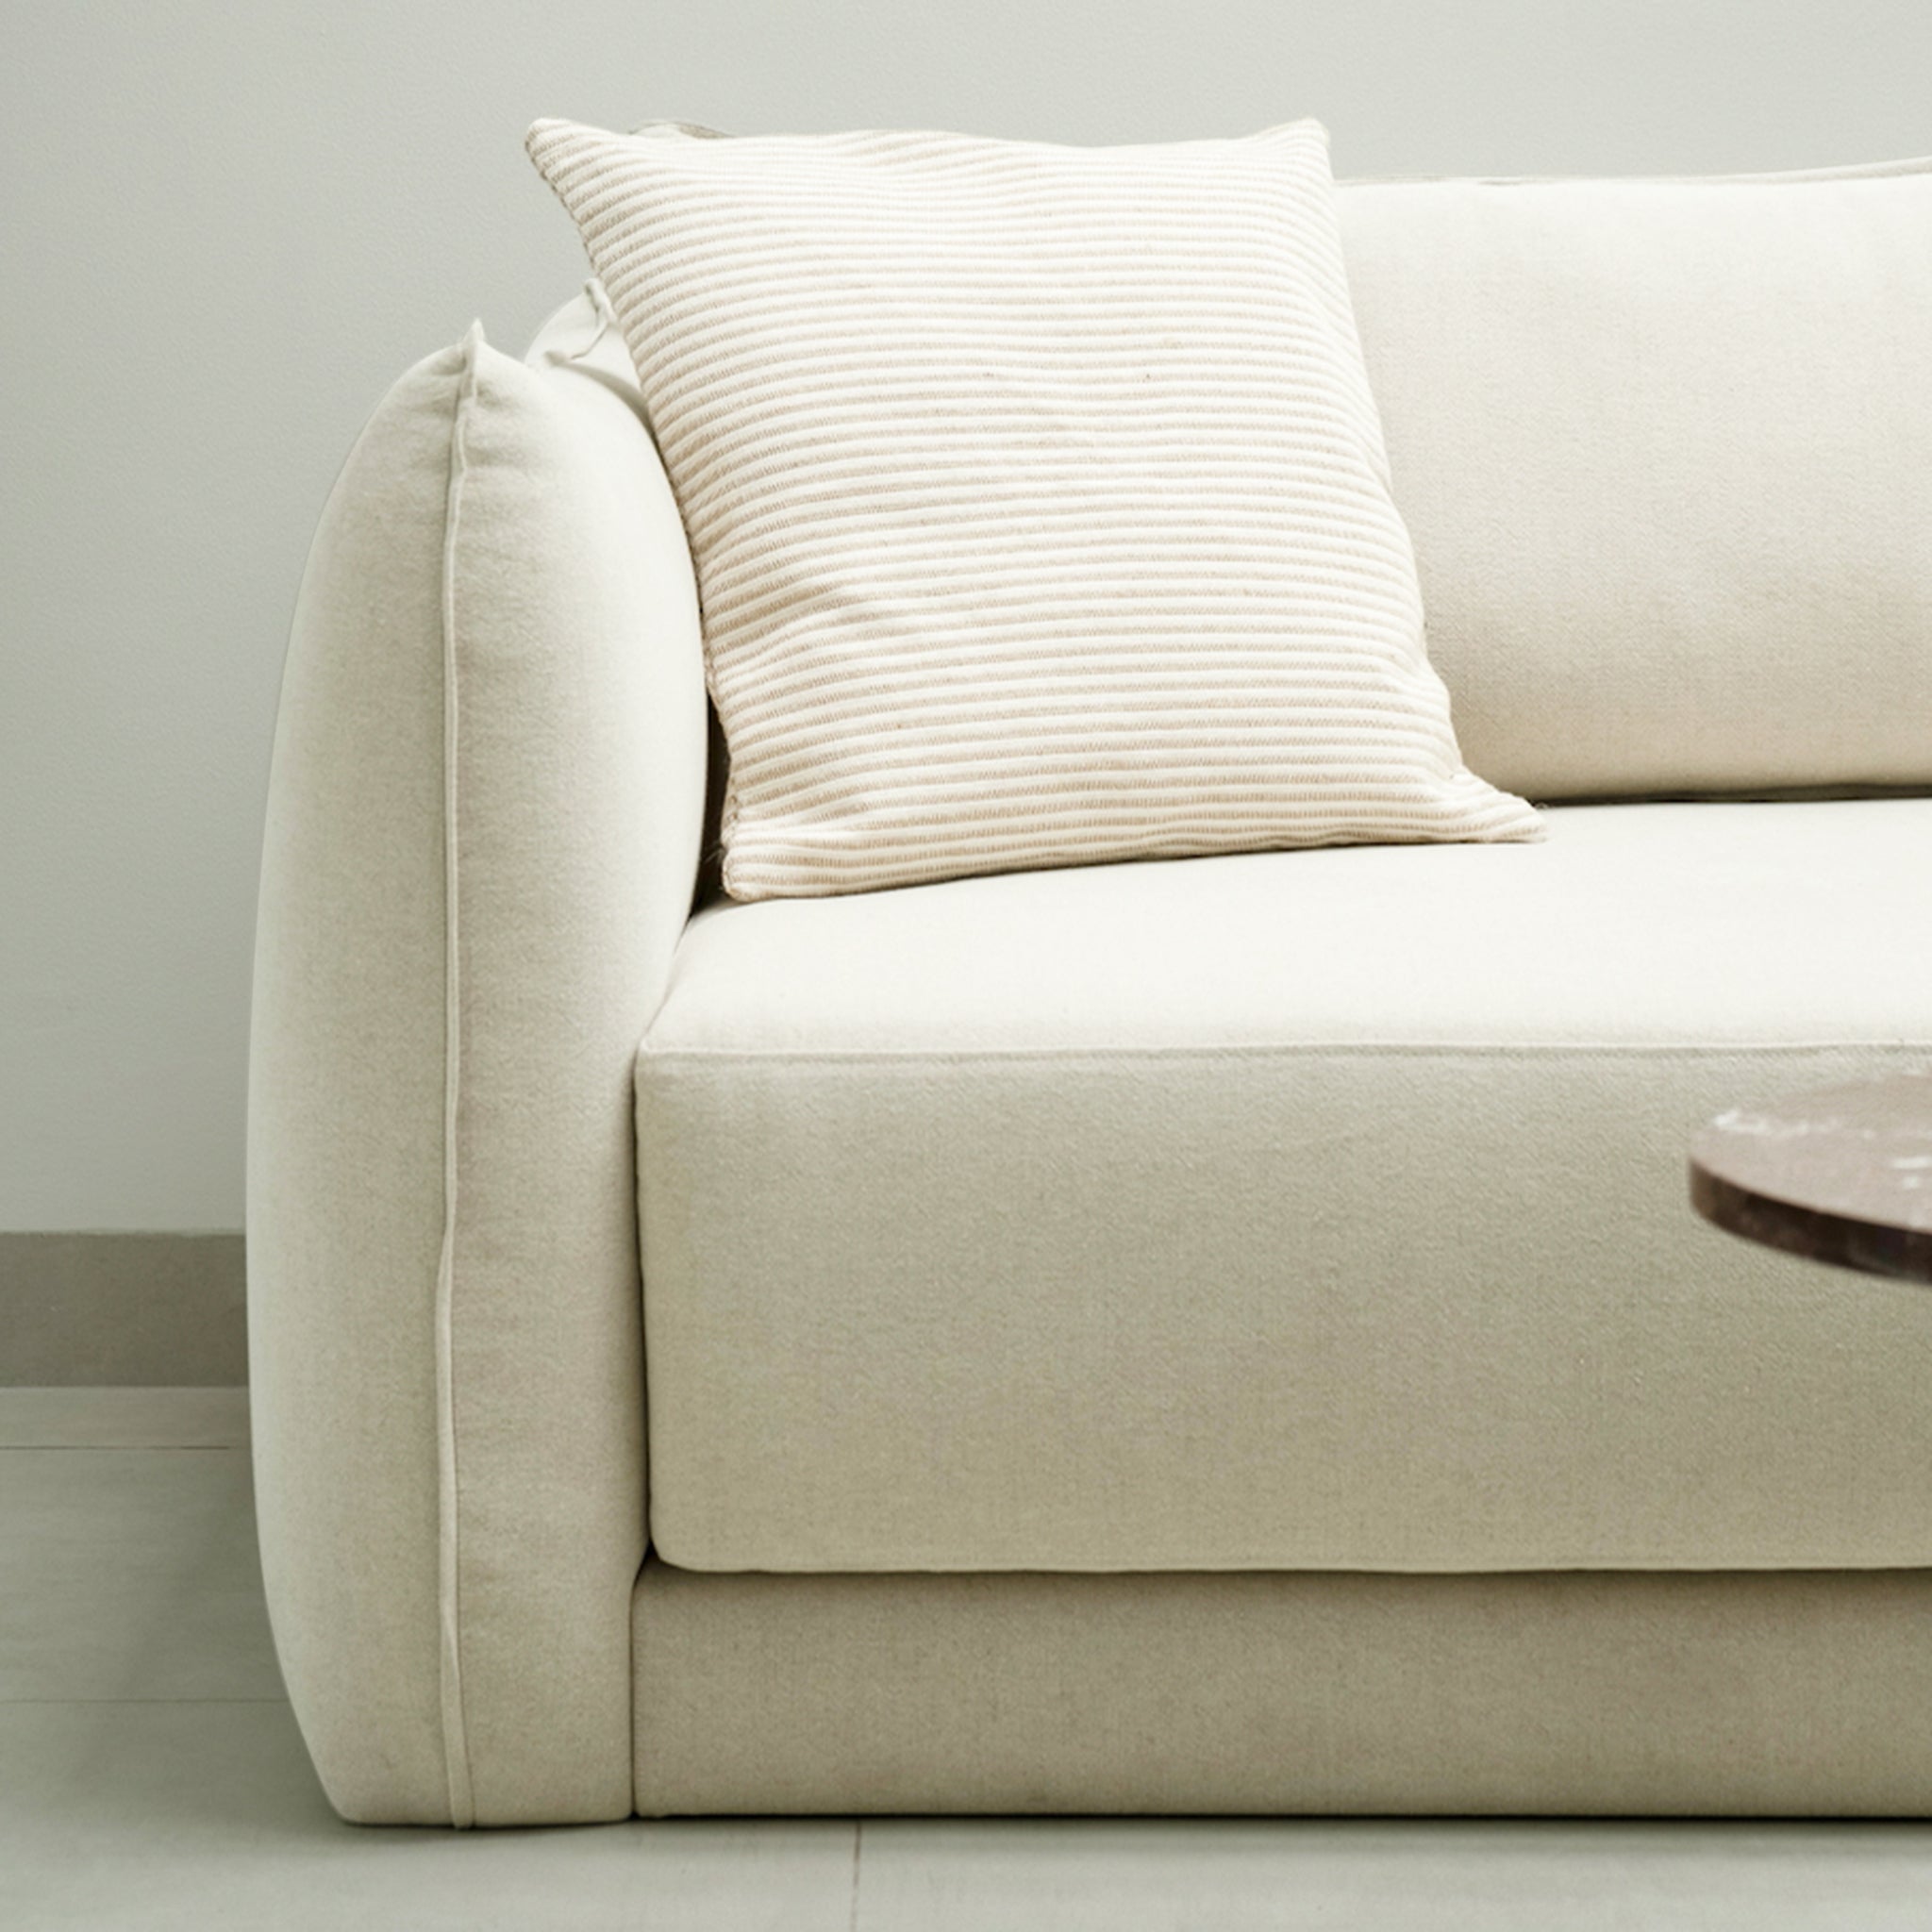 Close-up of a 0ff-white modern sofa with a striped cushion, emphasizing clean lines and minimalistic design.